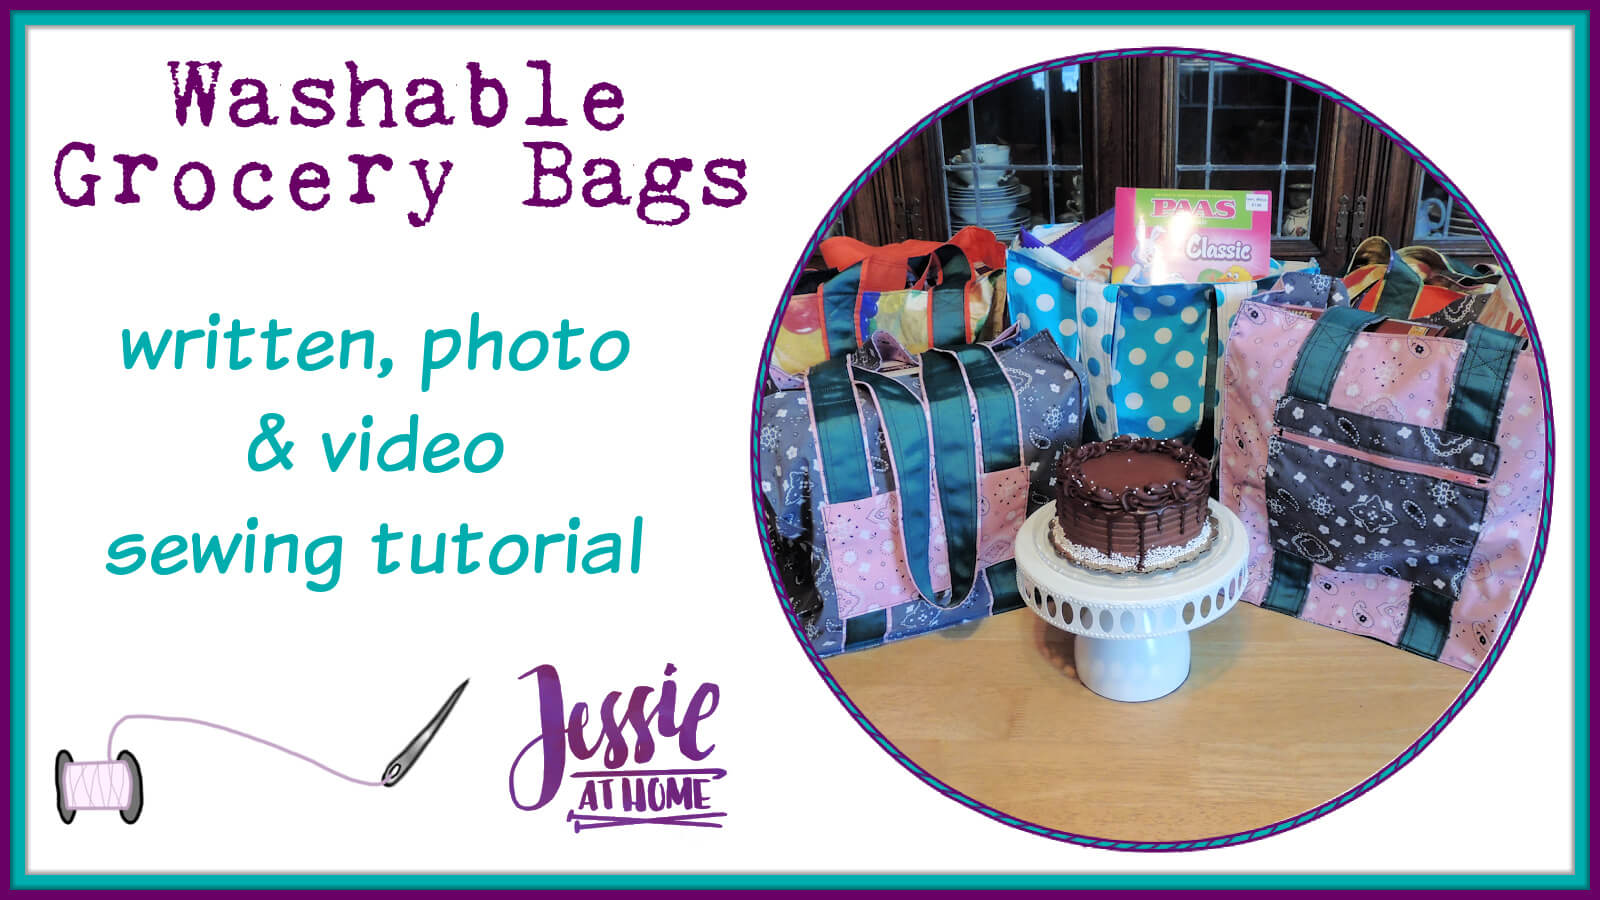 https://www.jessieathome.com/wp-content/uploads/2021/03/Washable-Grocery-Bags-written-photo-video-tutorial-by-Jessie-At-Home-Social.jpg